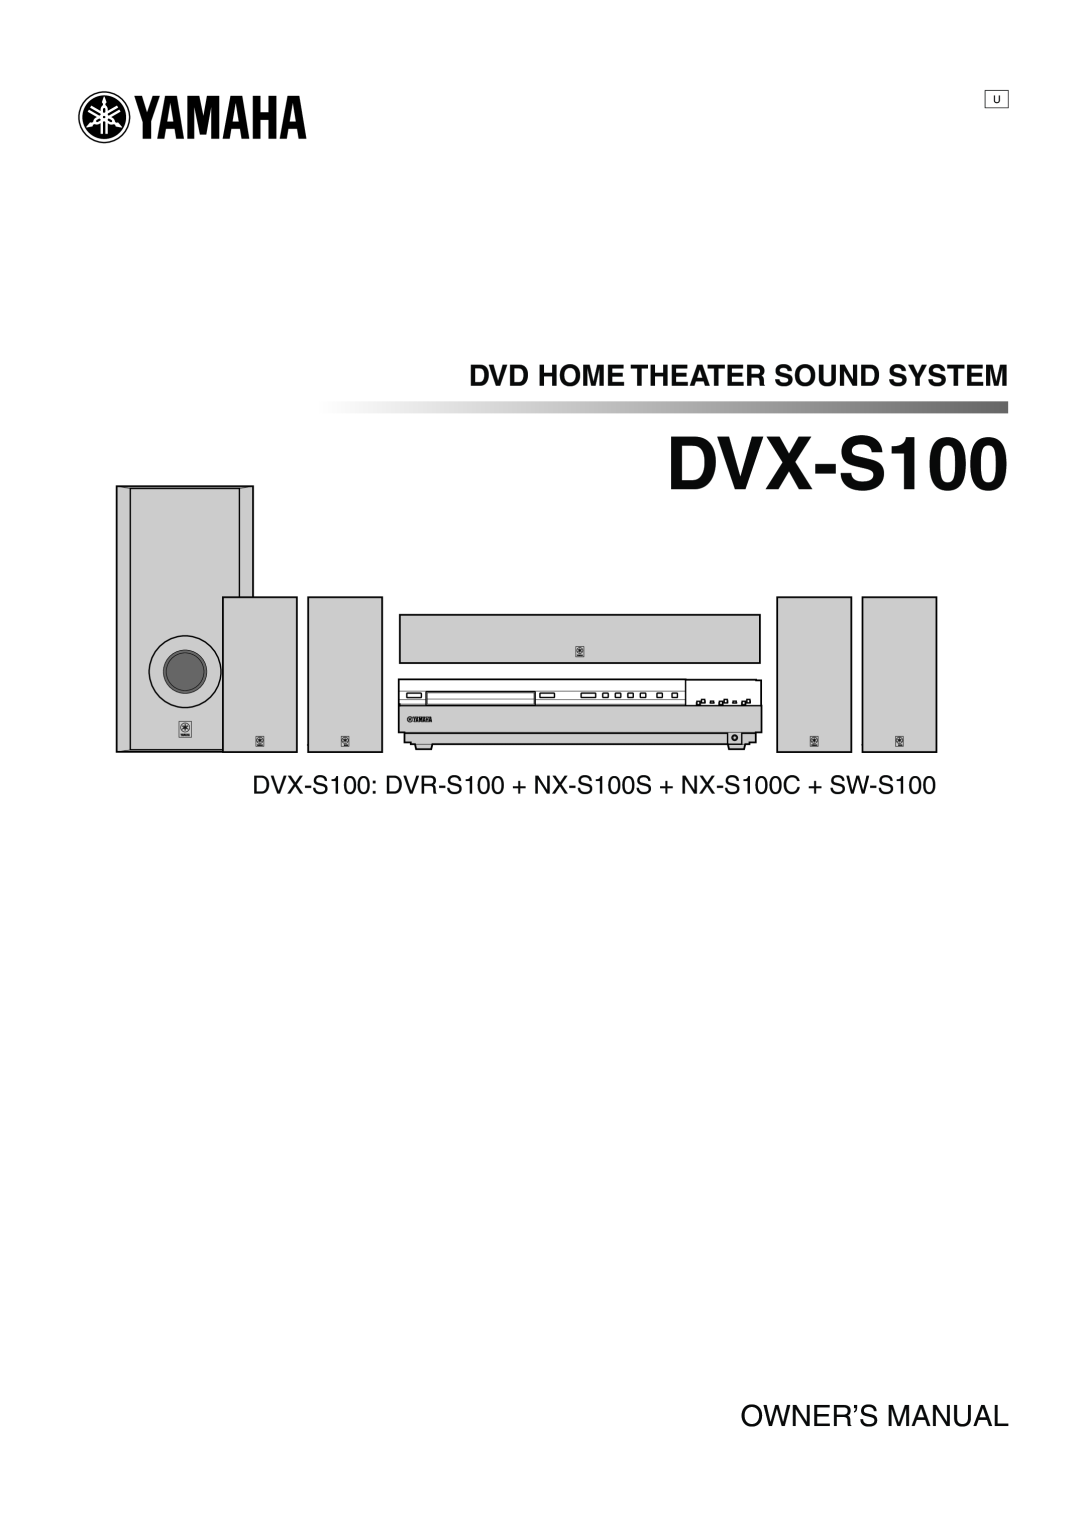 Yamaha owner manual Dvd Home Theater Sound System, DVX-S100 DVR-S100+ NX-S100S+ NX-S100C+ SW-S100 